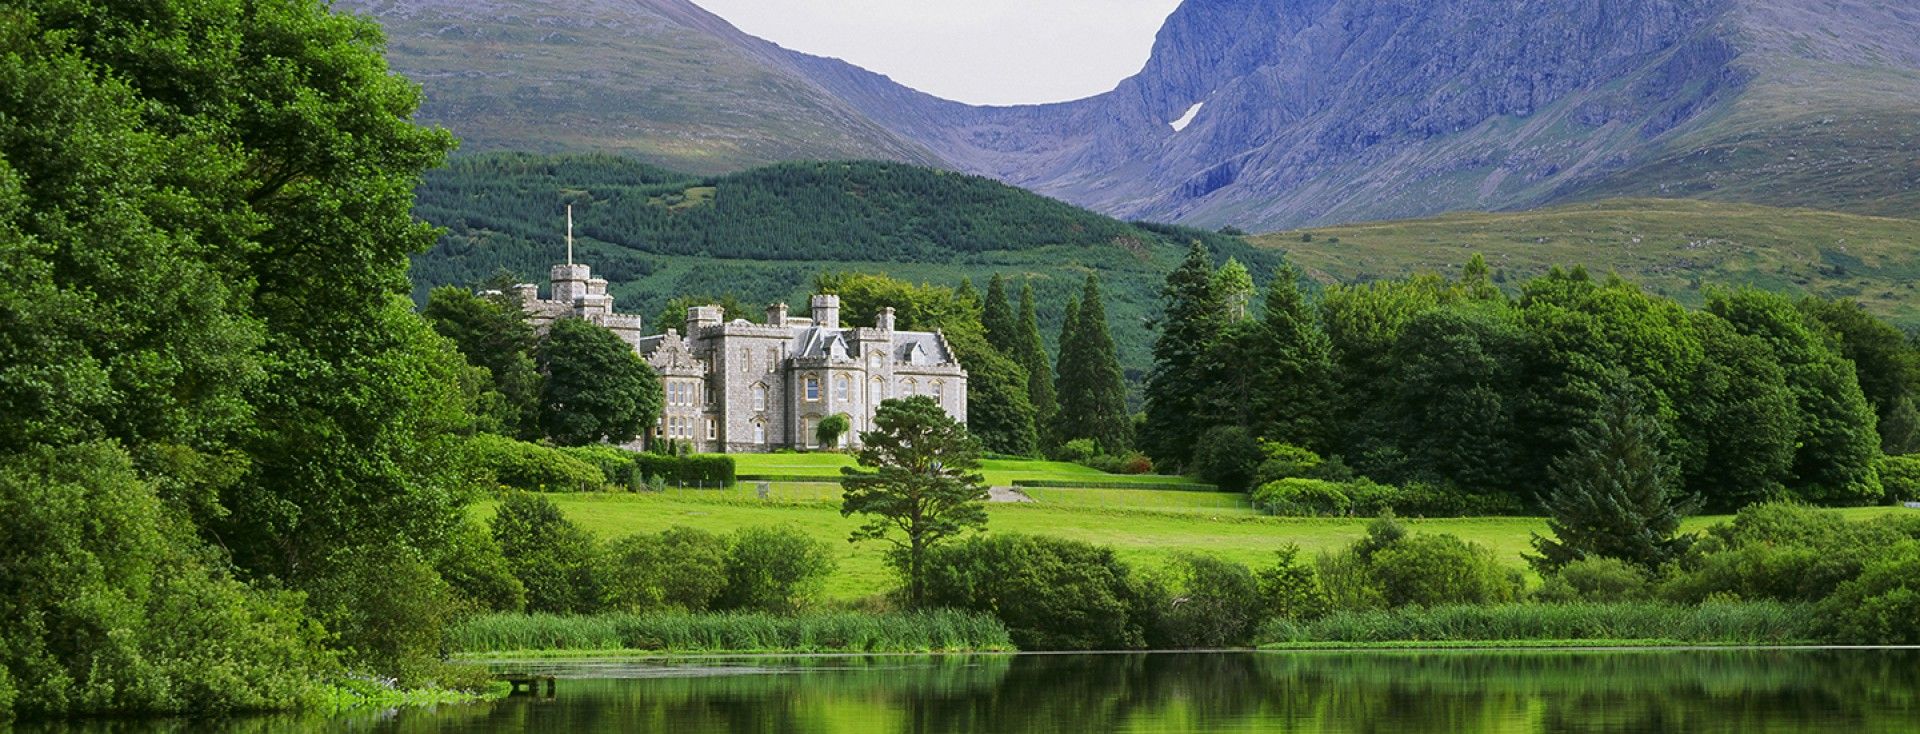 The Inverlochy Castle Hotel iswidely considered one of the worl